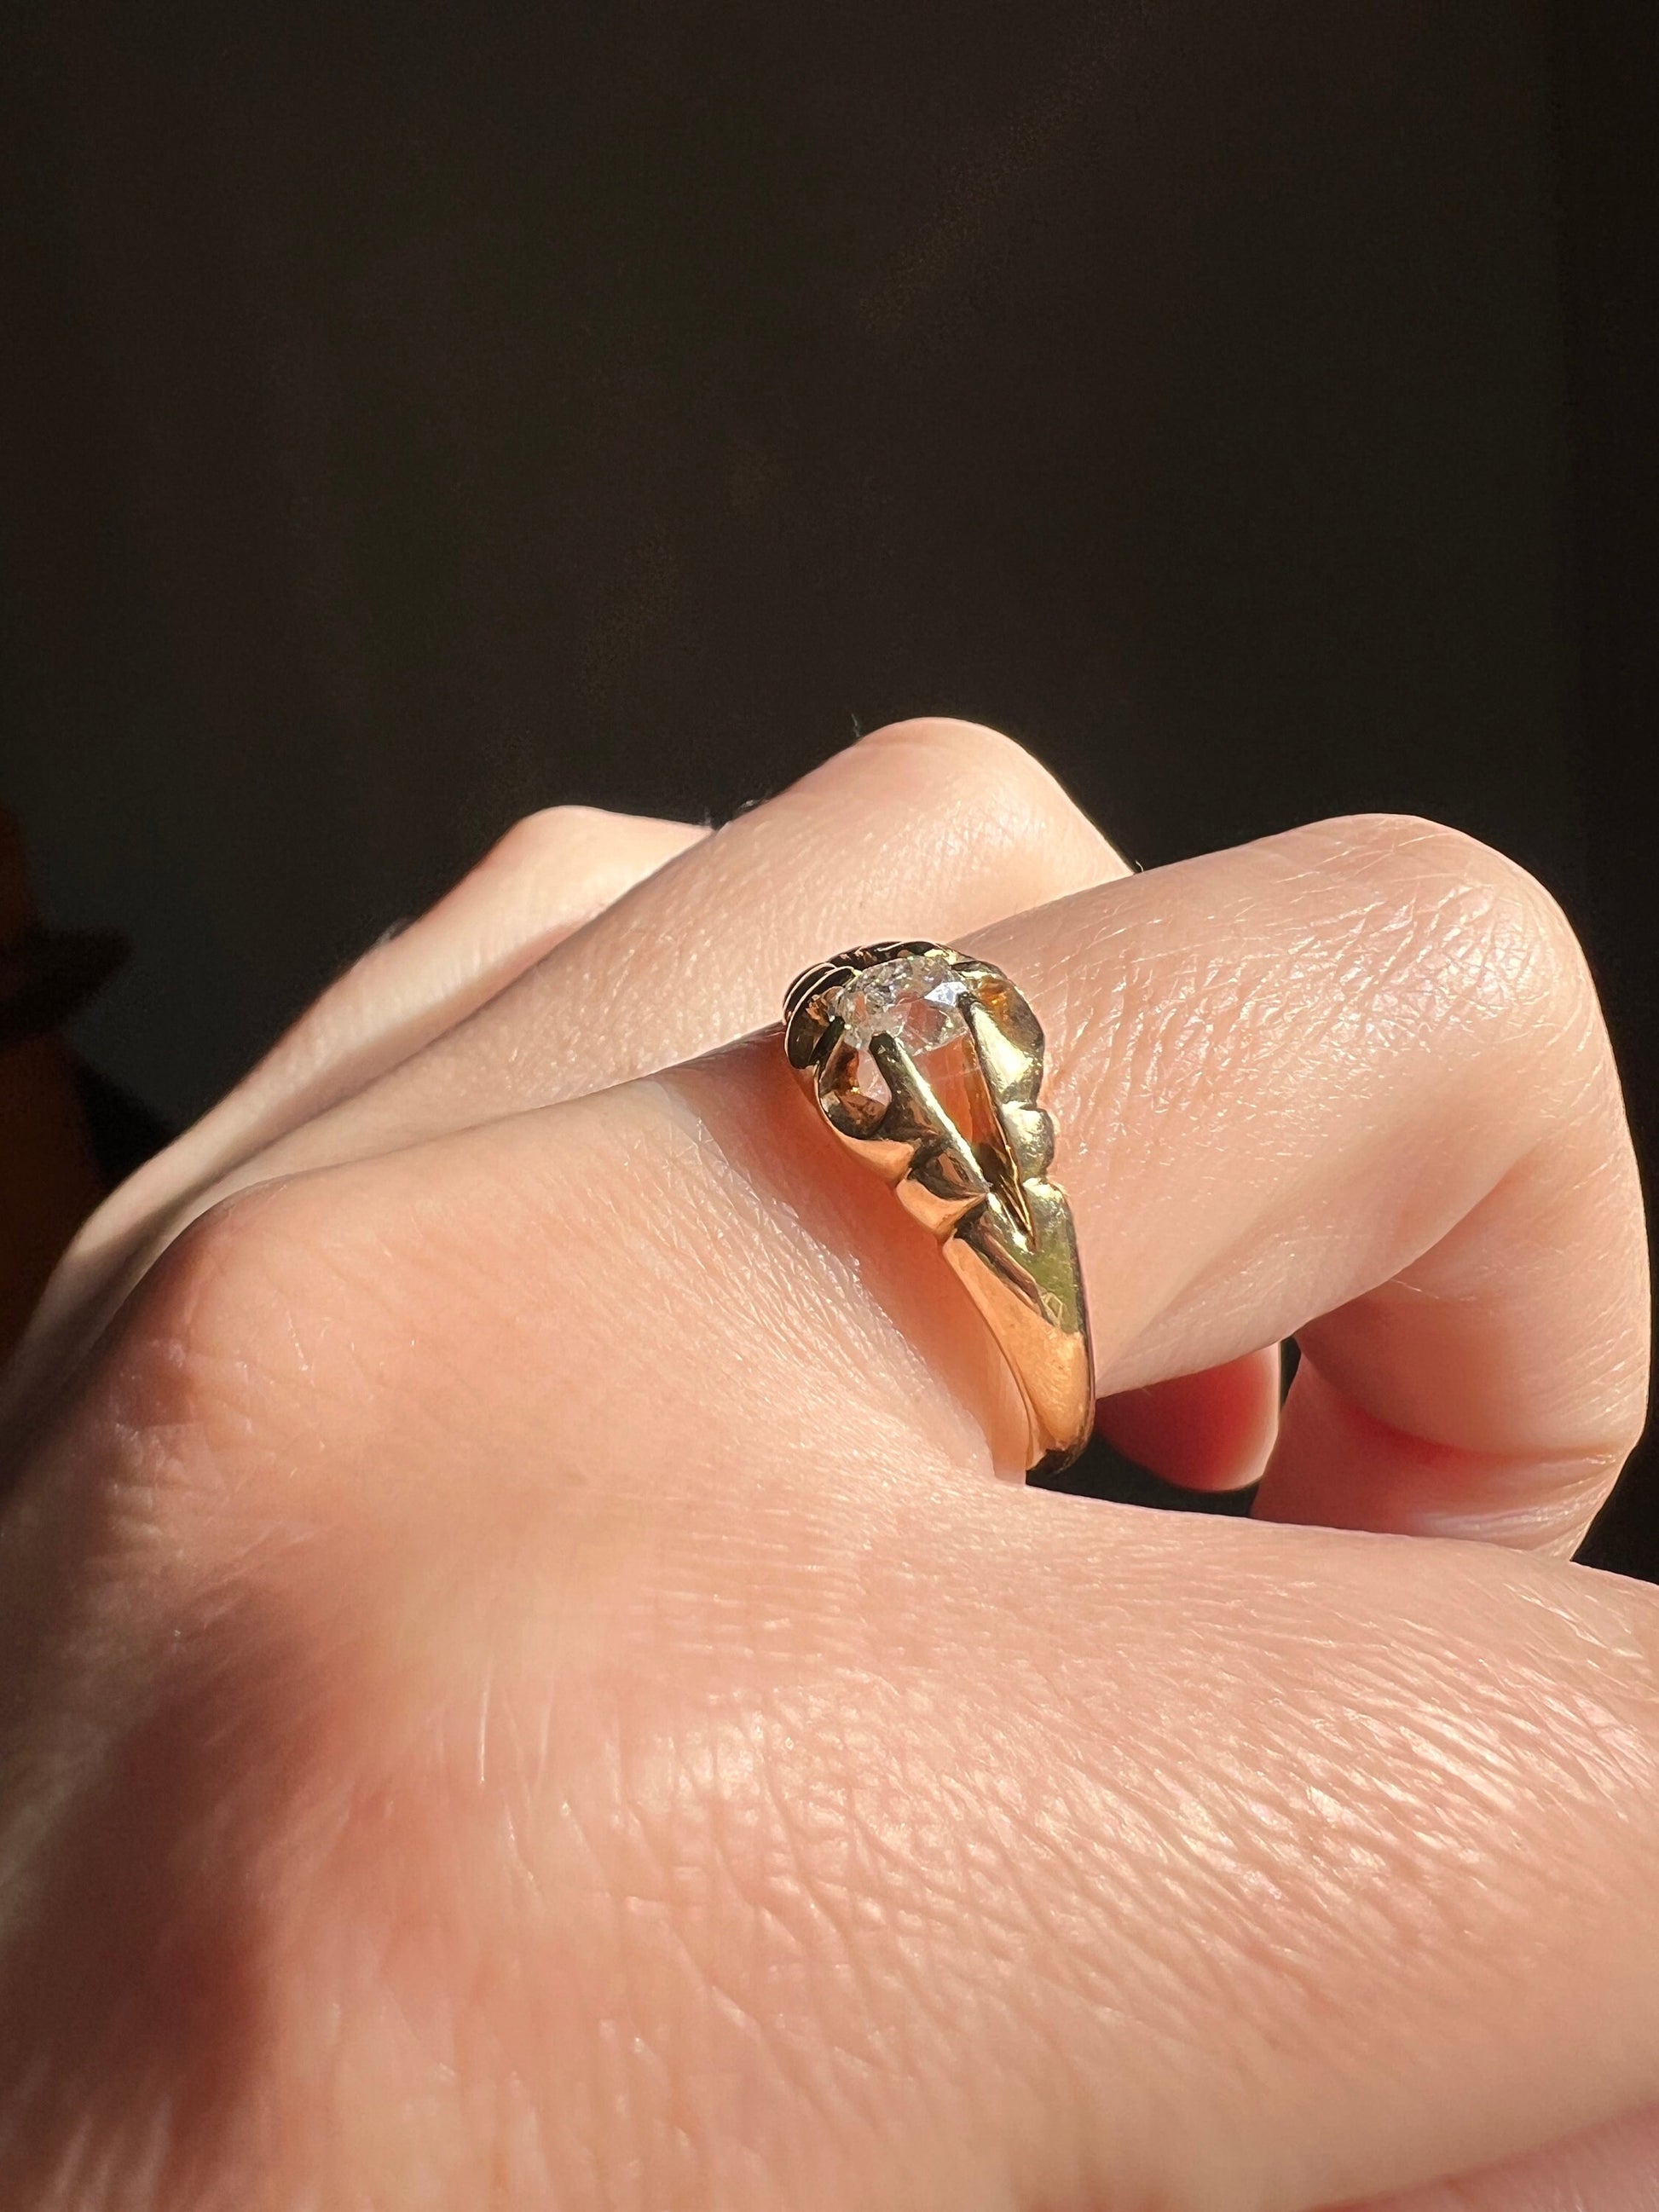 Unique Victorian ANTIQUE .5 Carat Gypsy Band Ring 18k Gold OVAL Old Mine Cut DIAMOND Buttercup Belcher Stacker Romantic Gift OmC Geometric